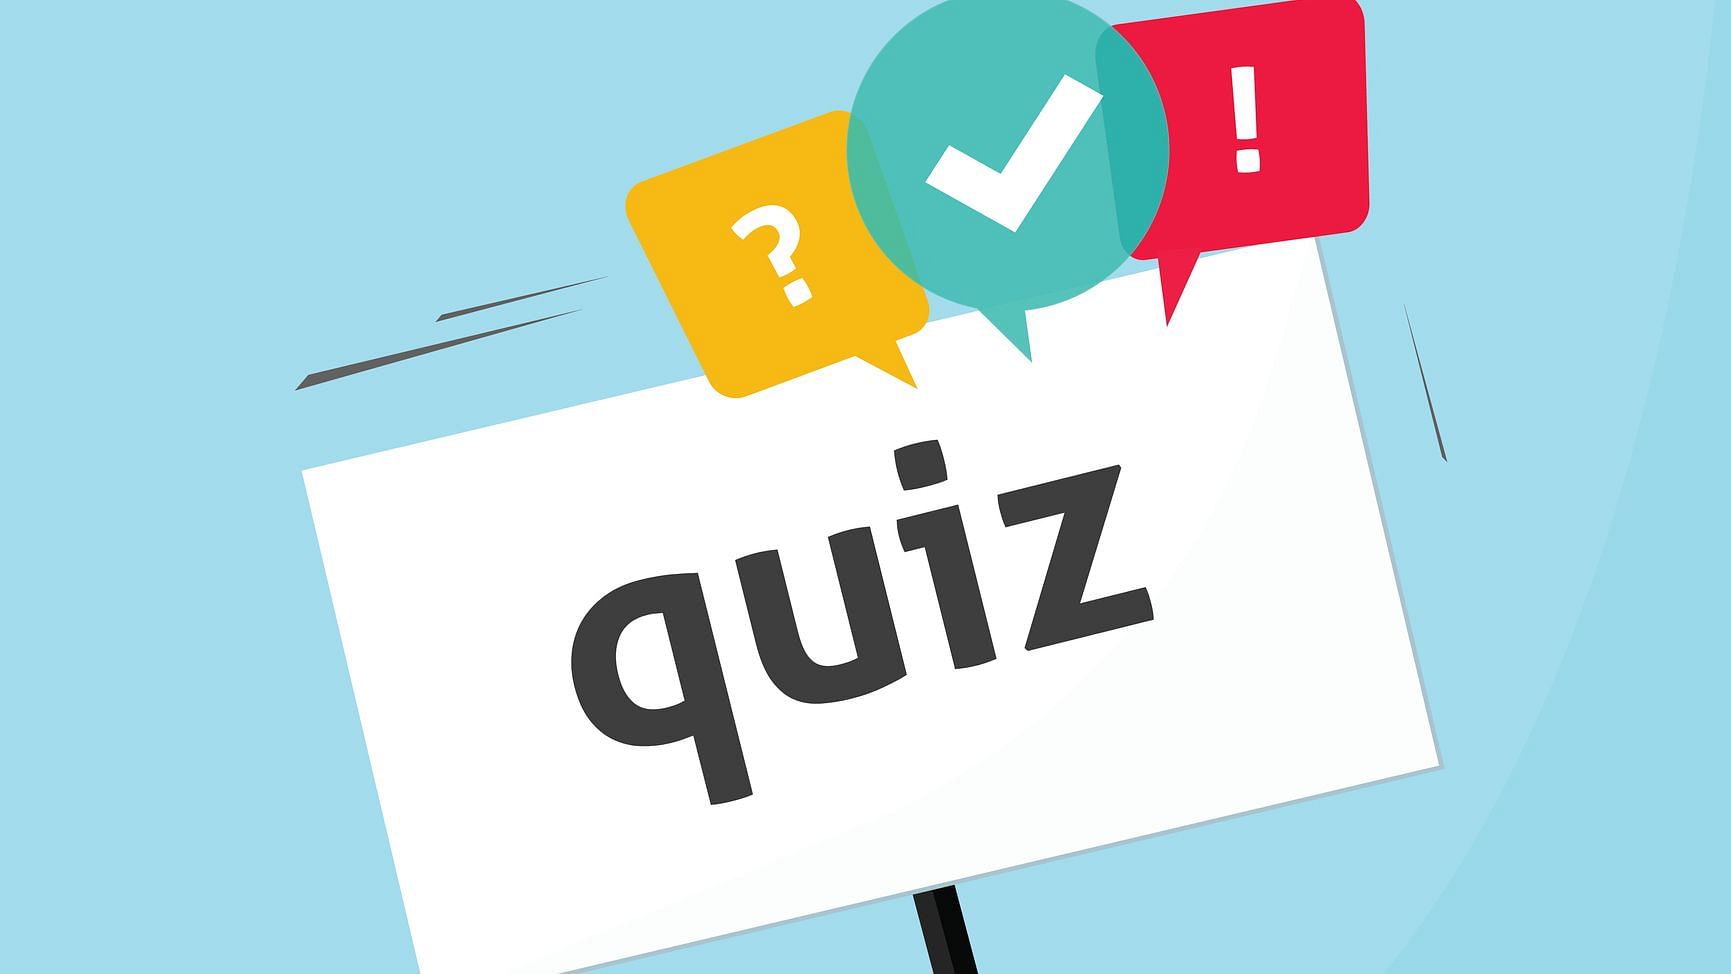 watches logo quiz answers